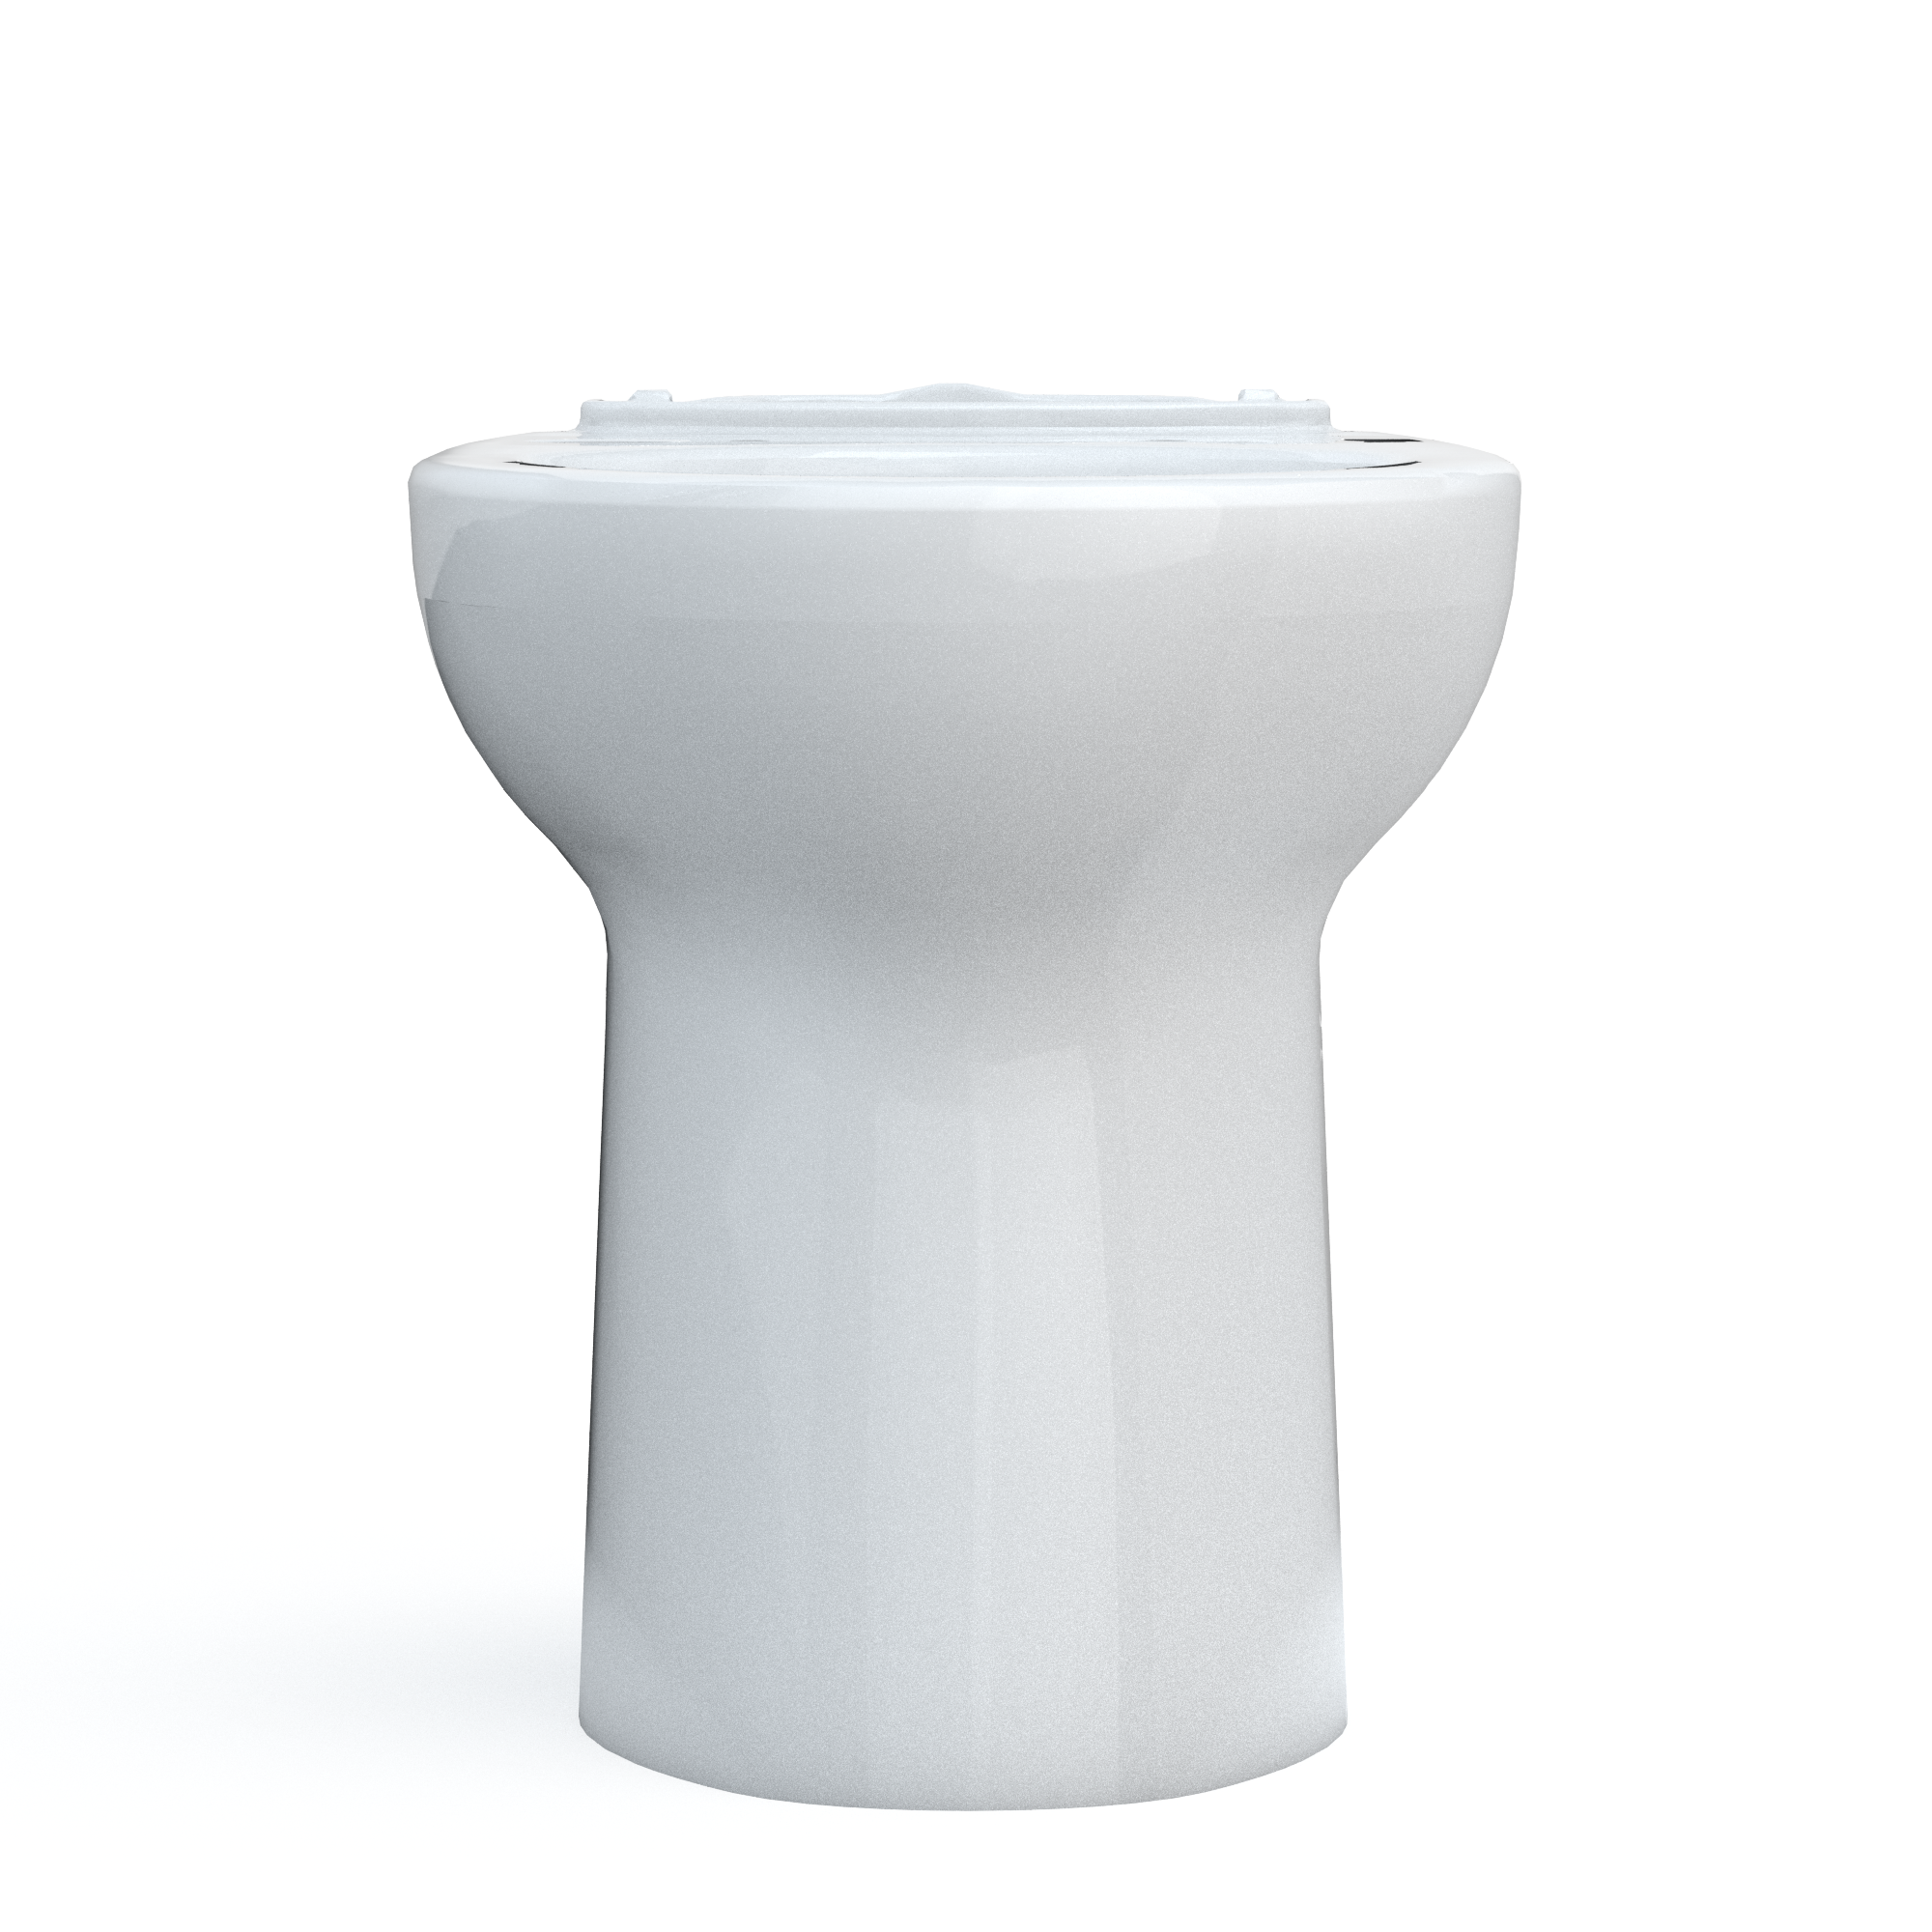 TOTO® Drake® Elongated Universal Height TORNADO FLUSH® Toilet Bowl with CEFIONTECT®, WASHLET®+ Ready, Cotton White - C776CEFGT40#01 - image 4 of 5